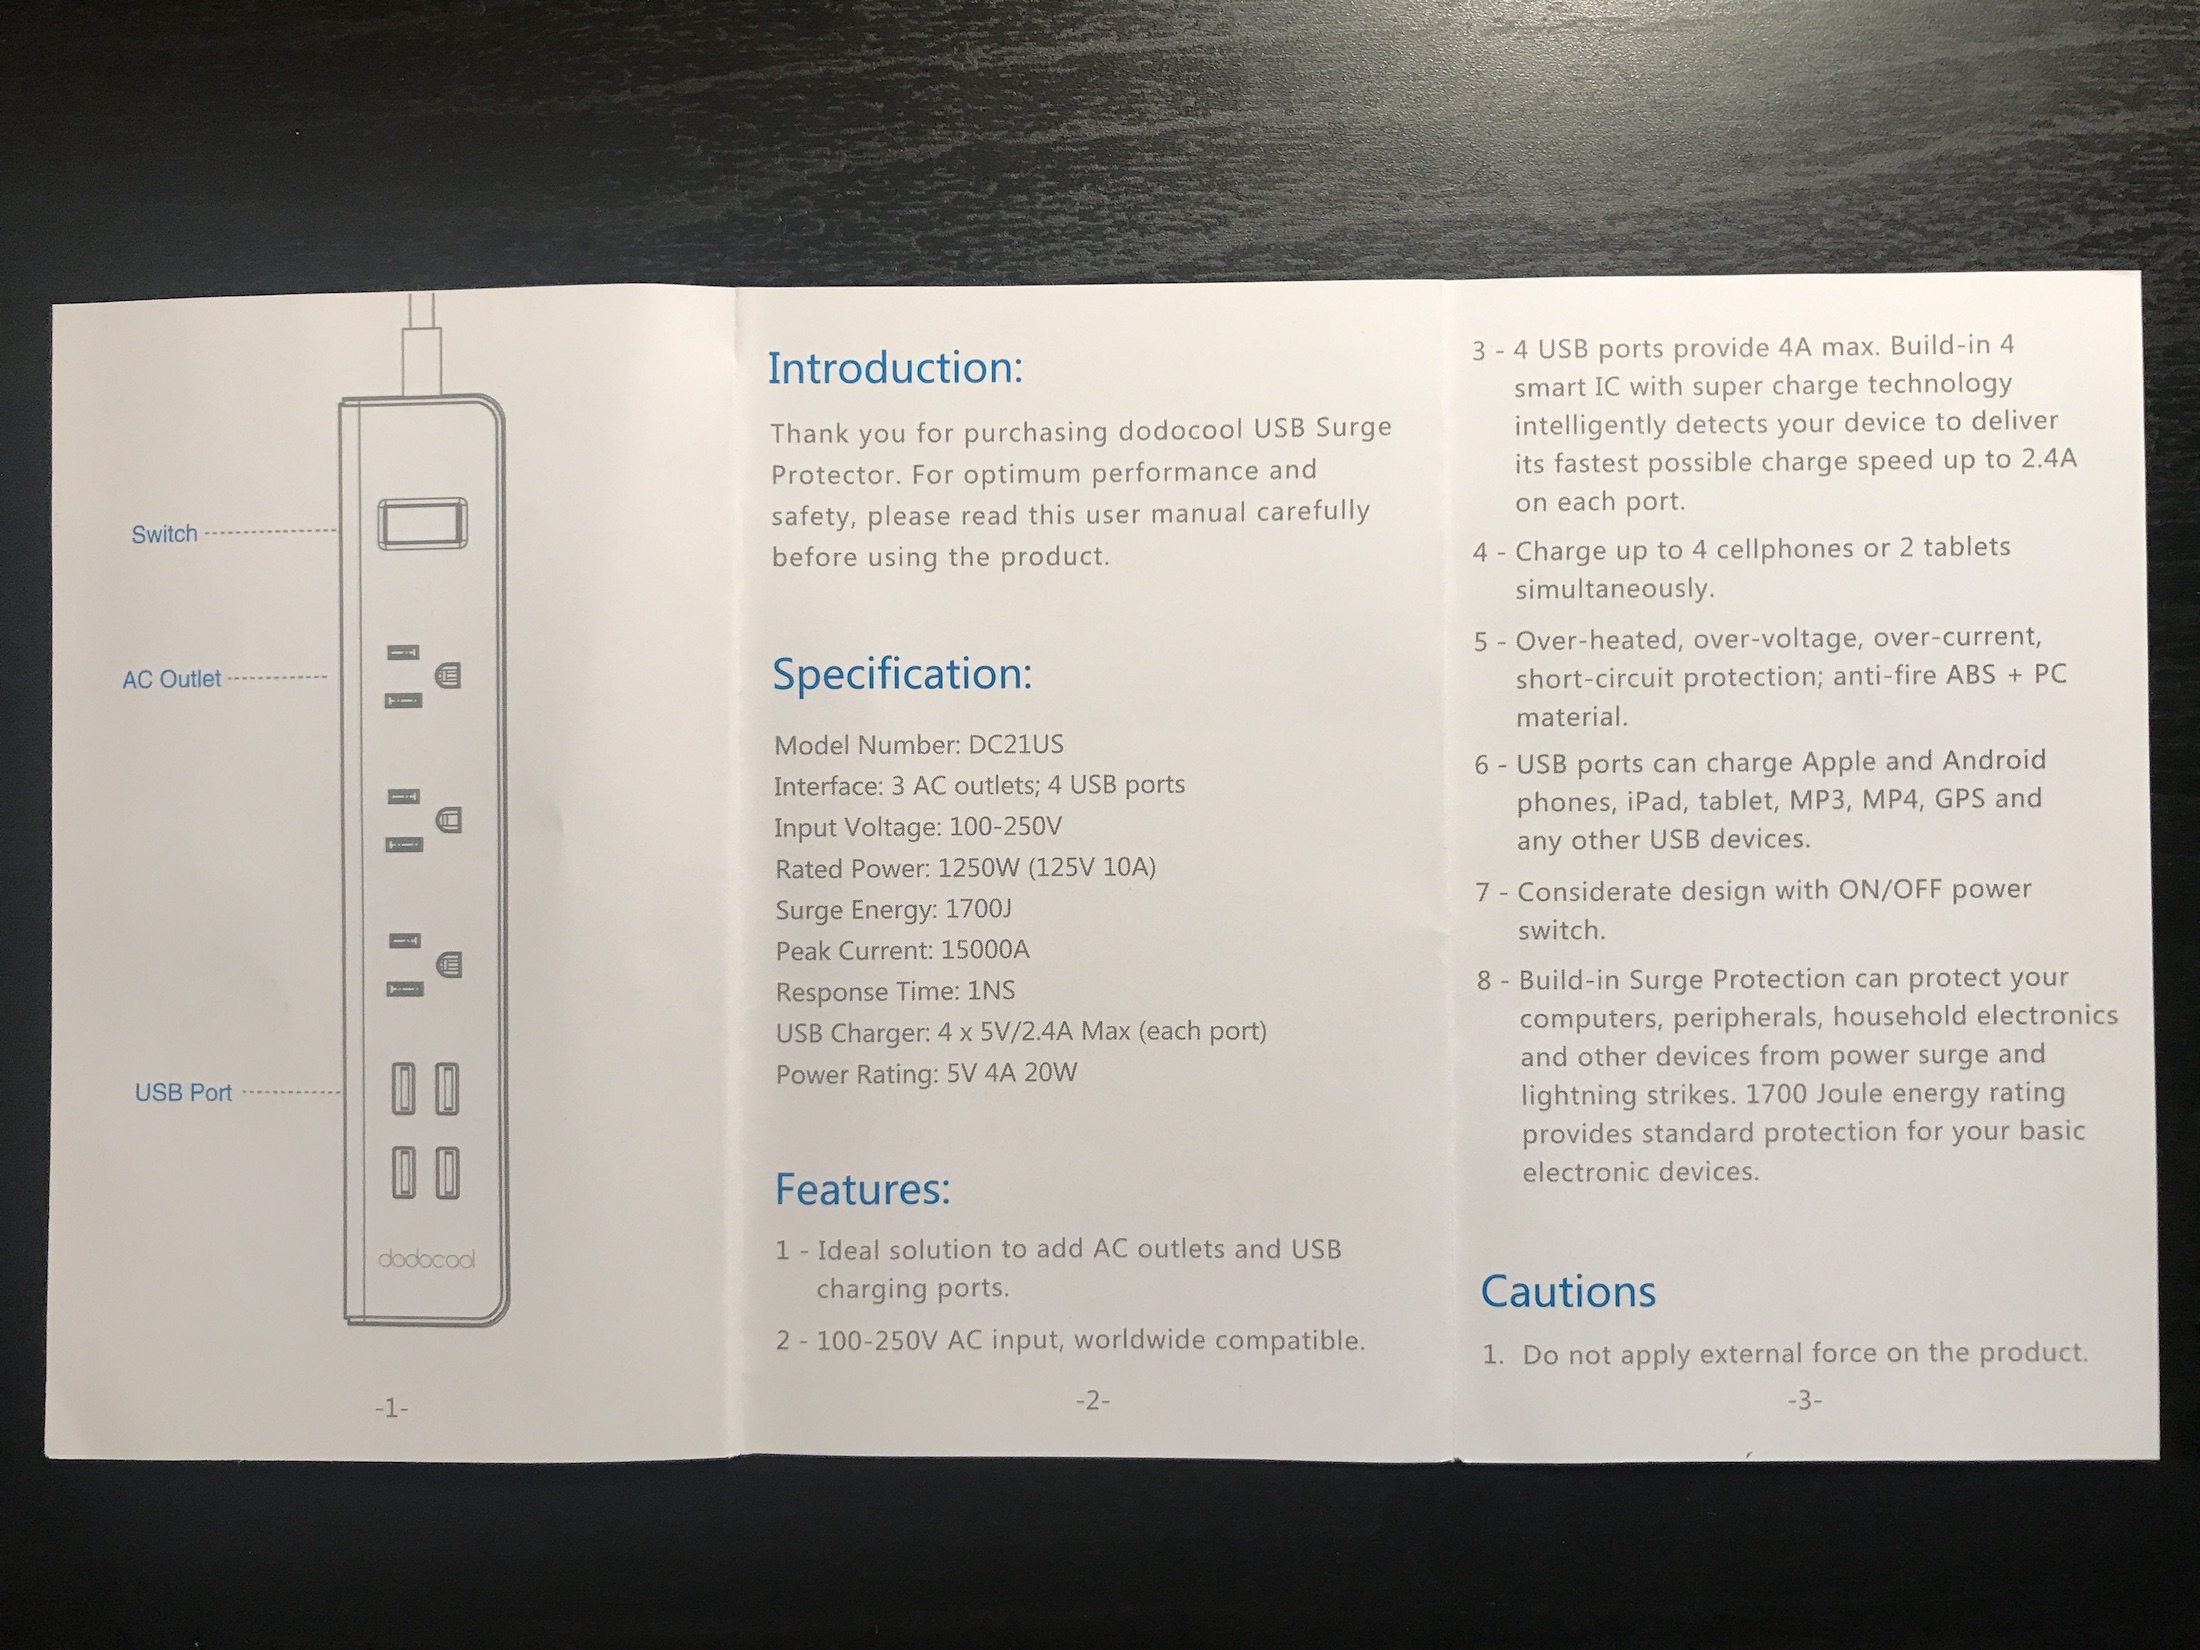 Review: Best USB Power Strip – Dodocool 4 USB Port and 3 AC Outlets